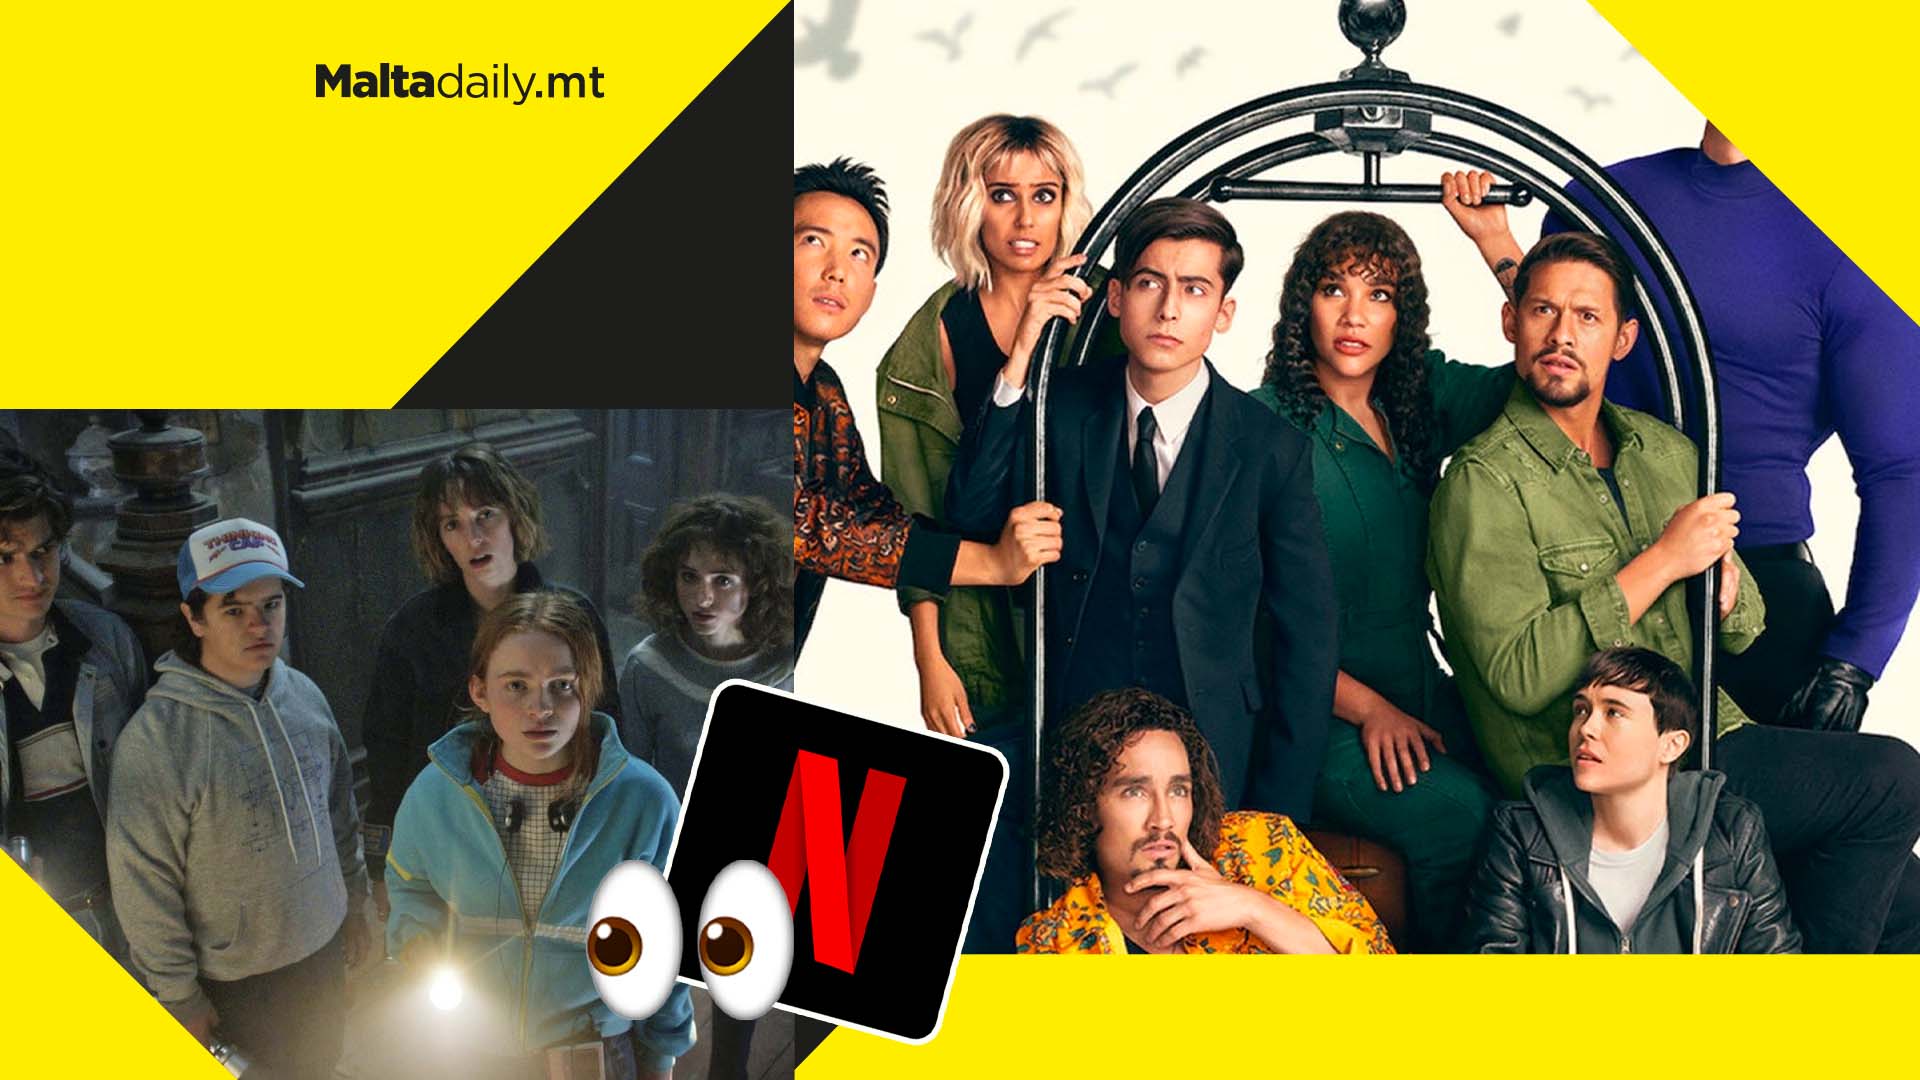 Stranger Things S4 loses top spot on Netflix to Umbrella Academy S3